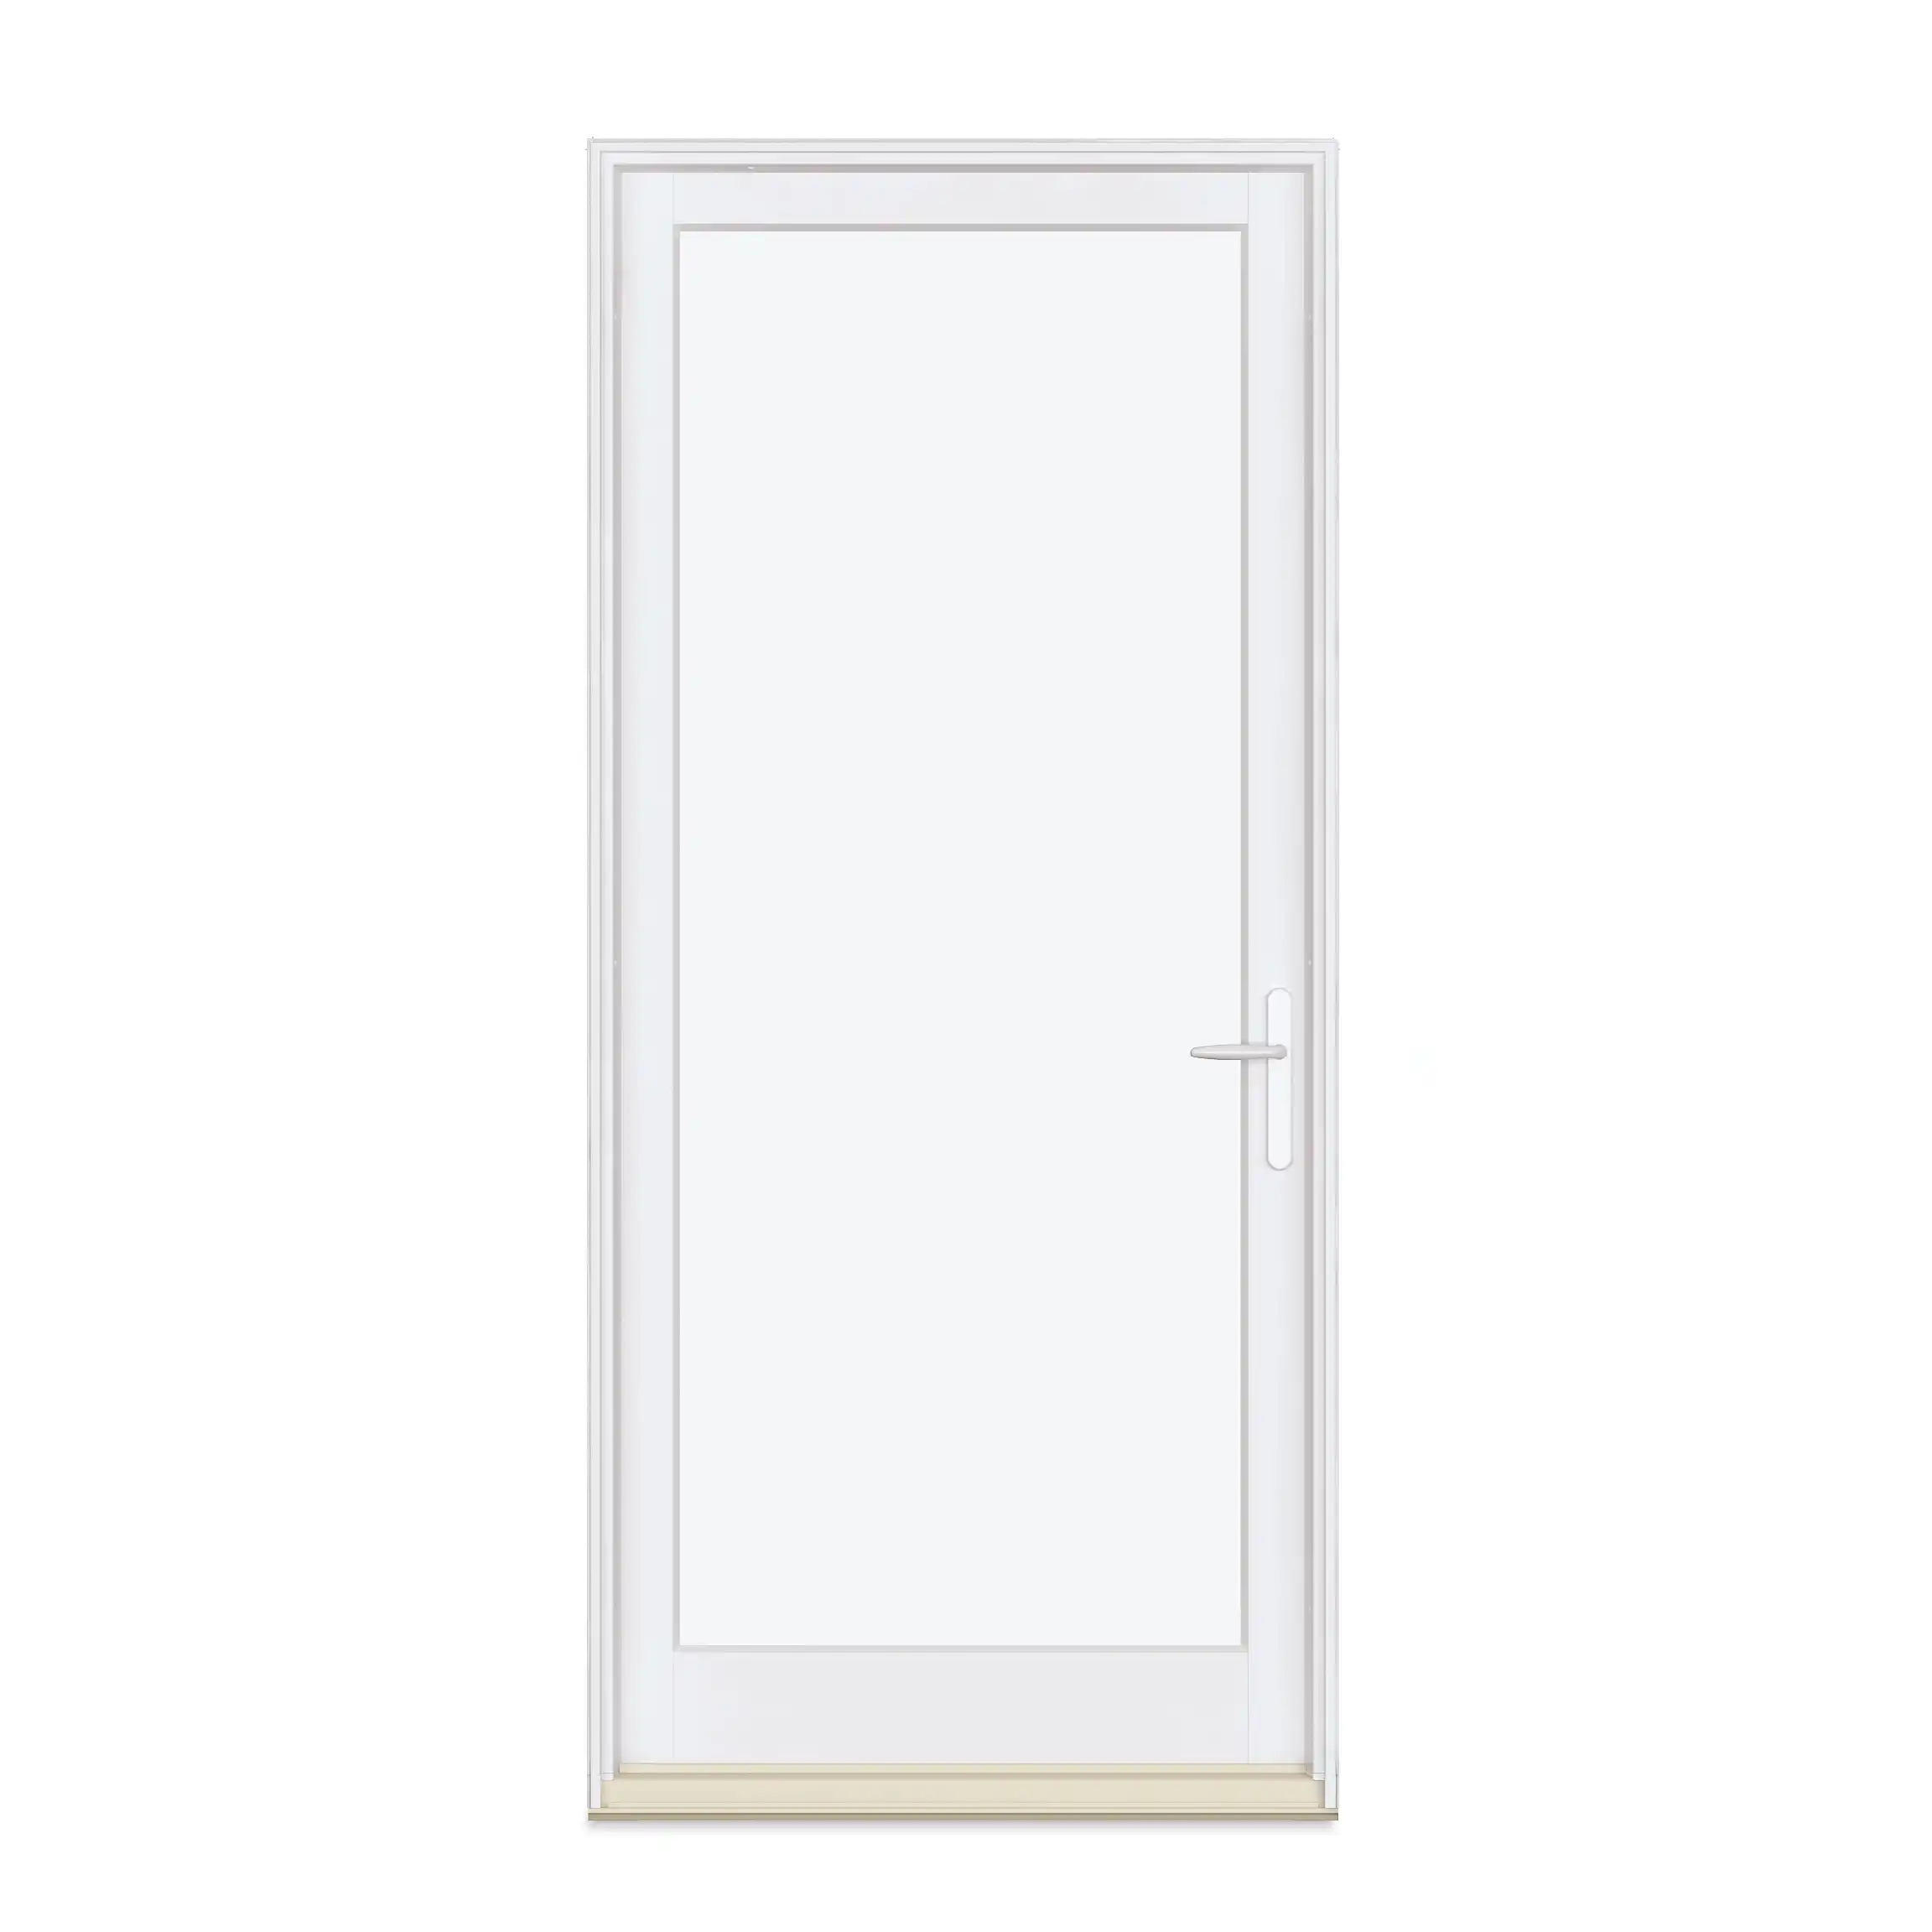 A white Marvin Replacement Inswing French door with a beige door sill and a white Northfield style door handle.